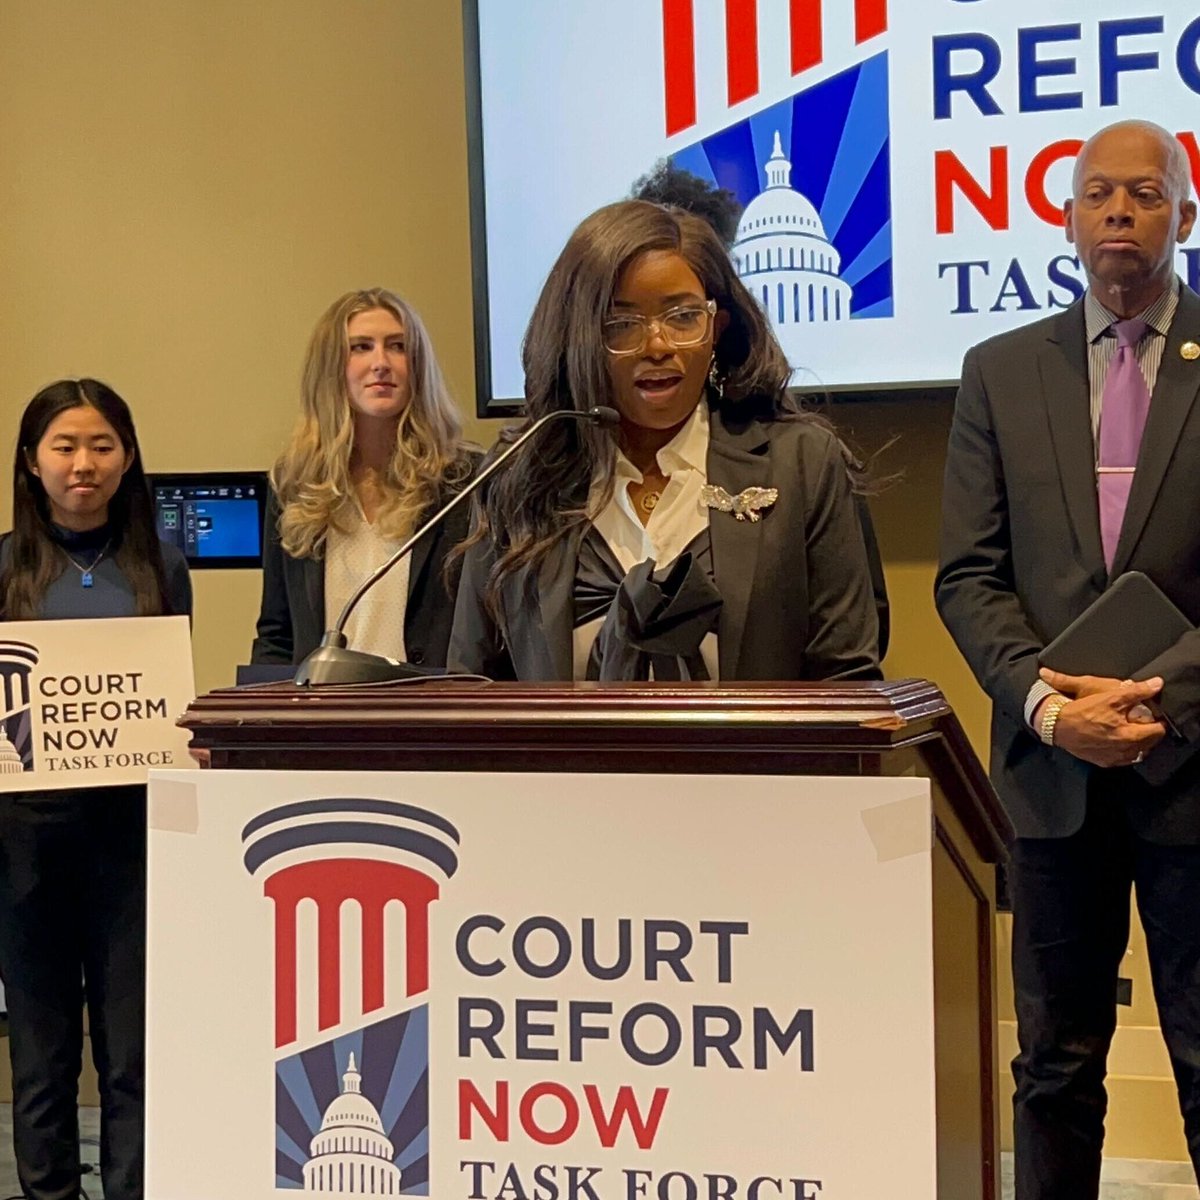 Thank you to @rephankjohnson, @RepJasmine, @RepDean, & @RepRaskin for creating the #CourtReformNow Task Force. Congress must expand the court, require term limits & impose a binding & enforceable code of conduct.